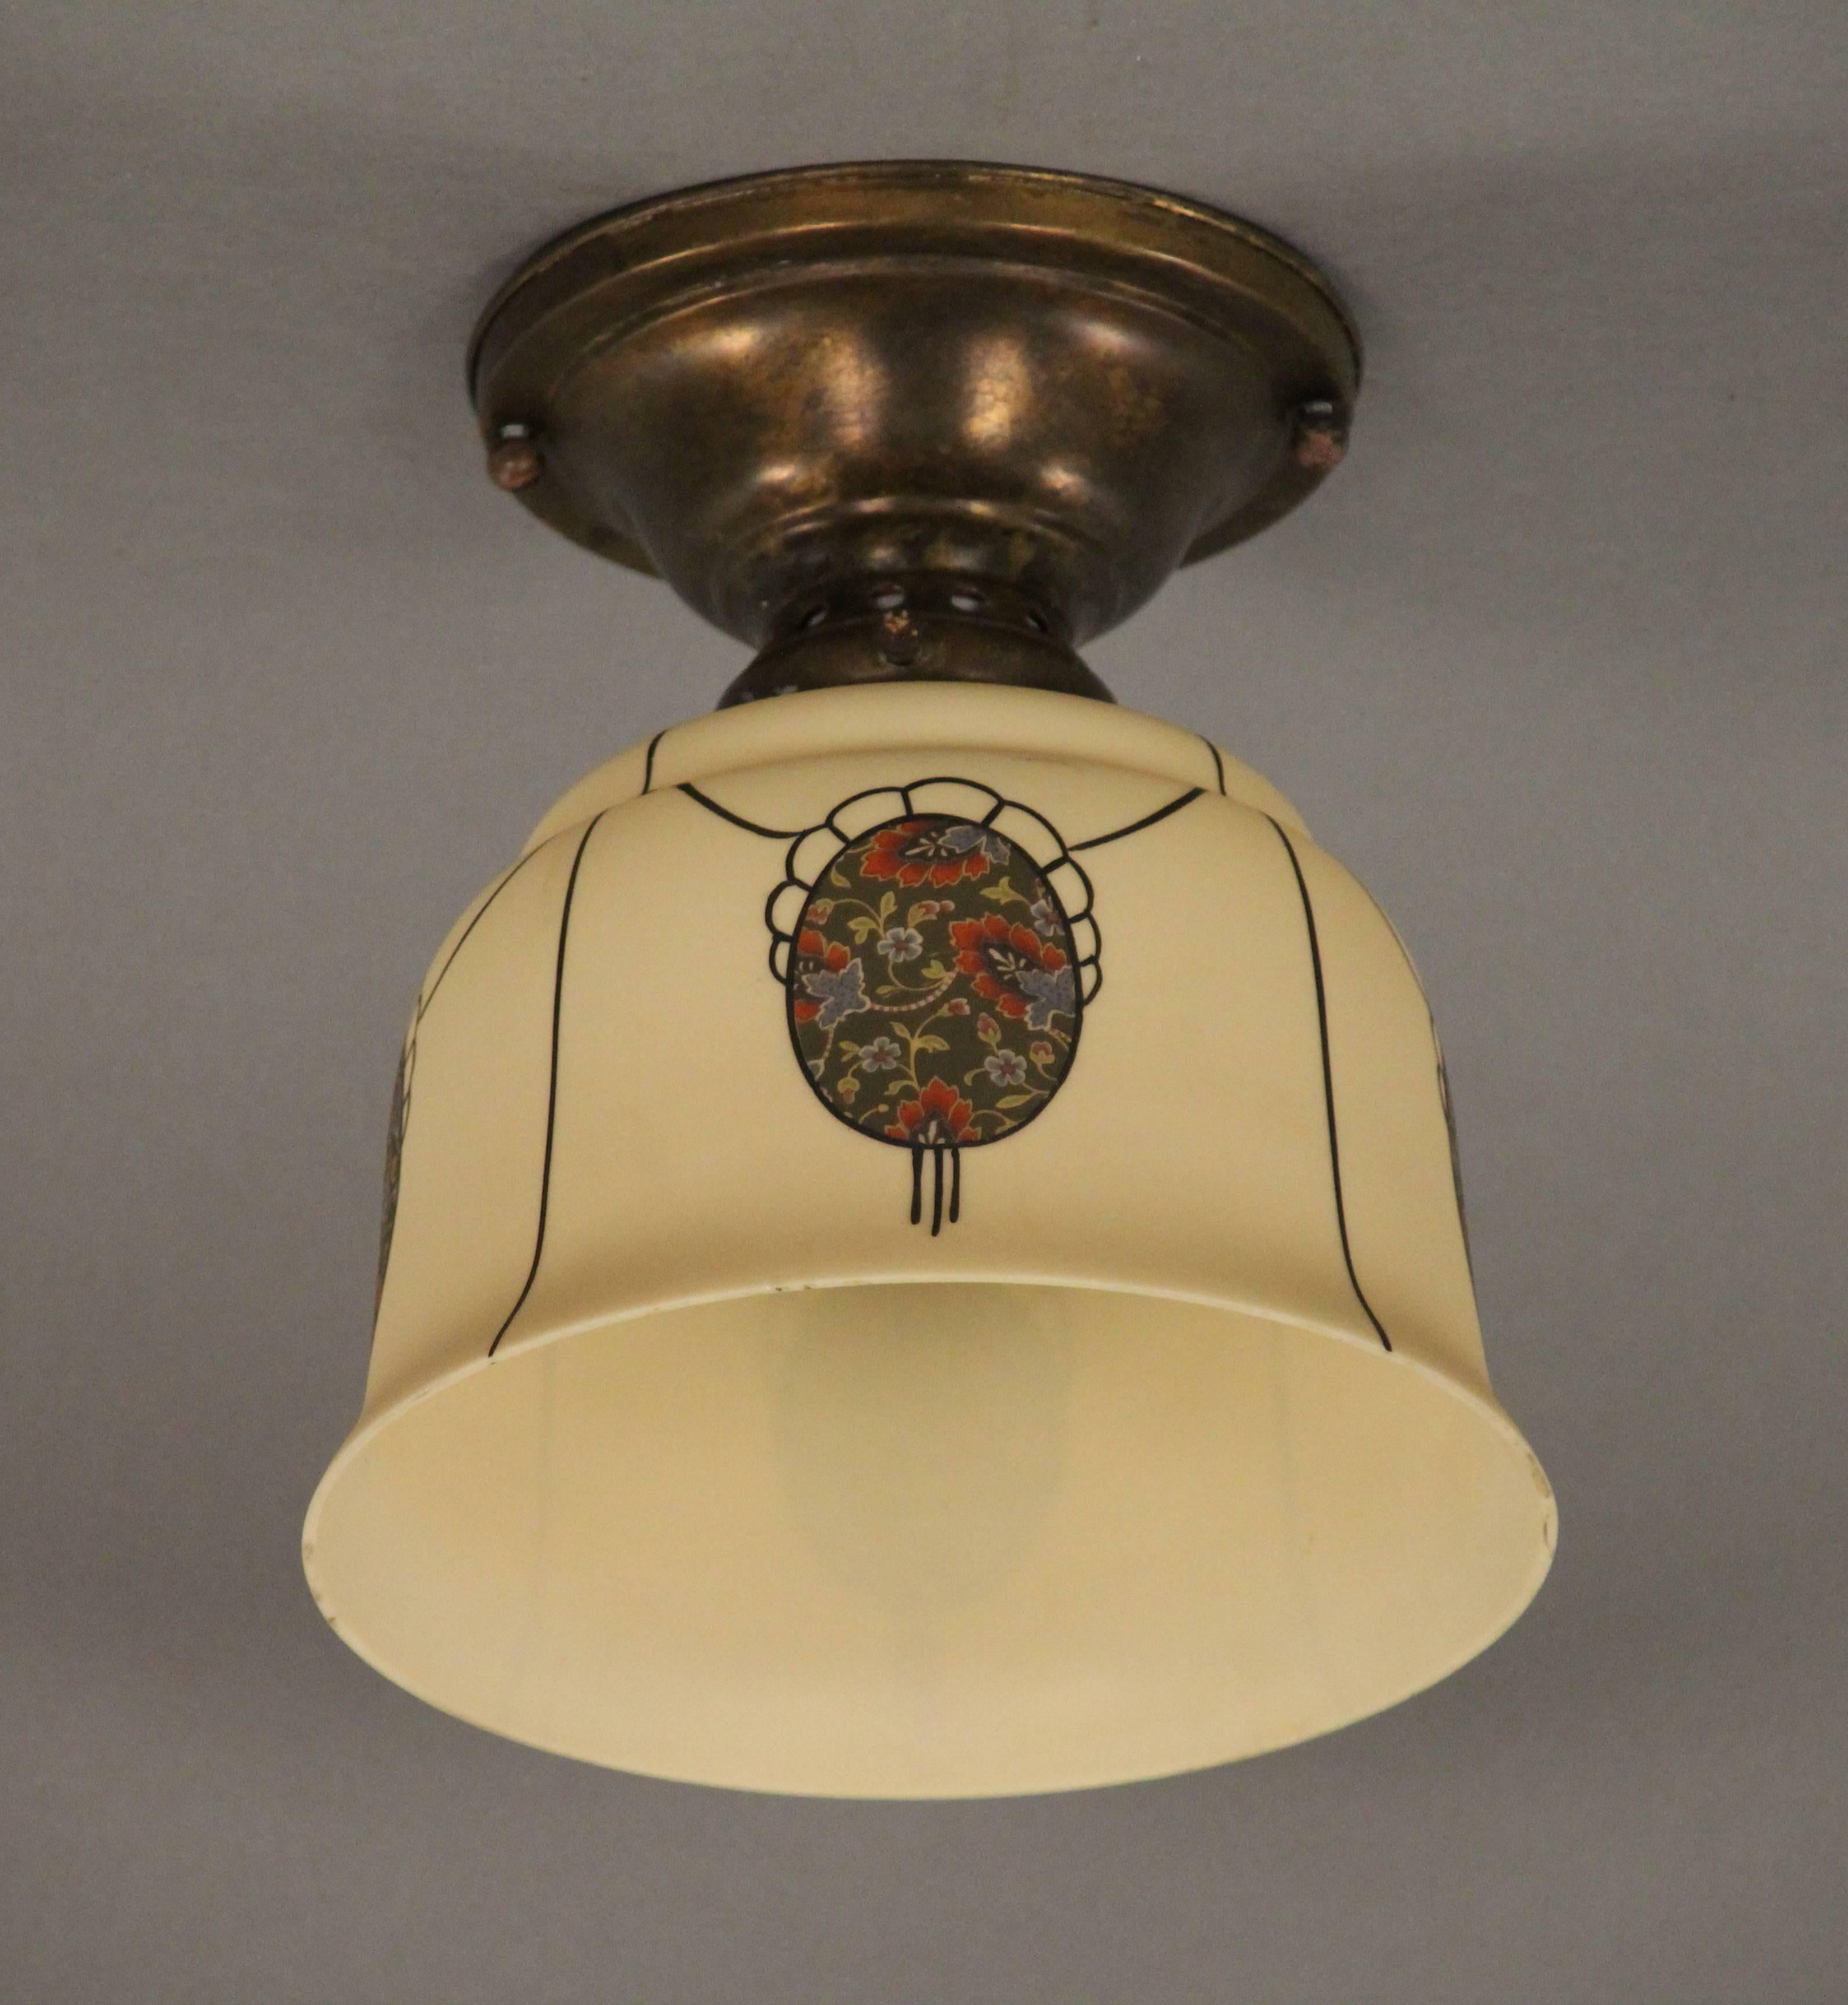 Spanish Colonial 1920s Hand-Painted Ceiling Mount with Glass Shade